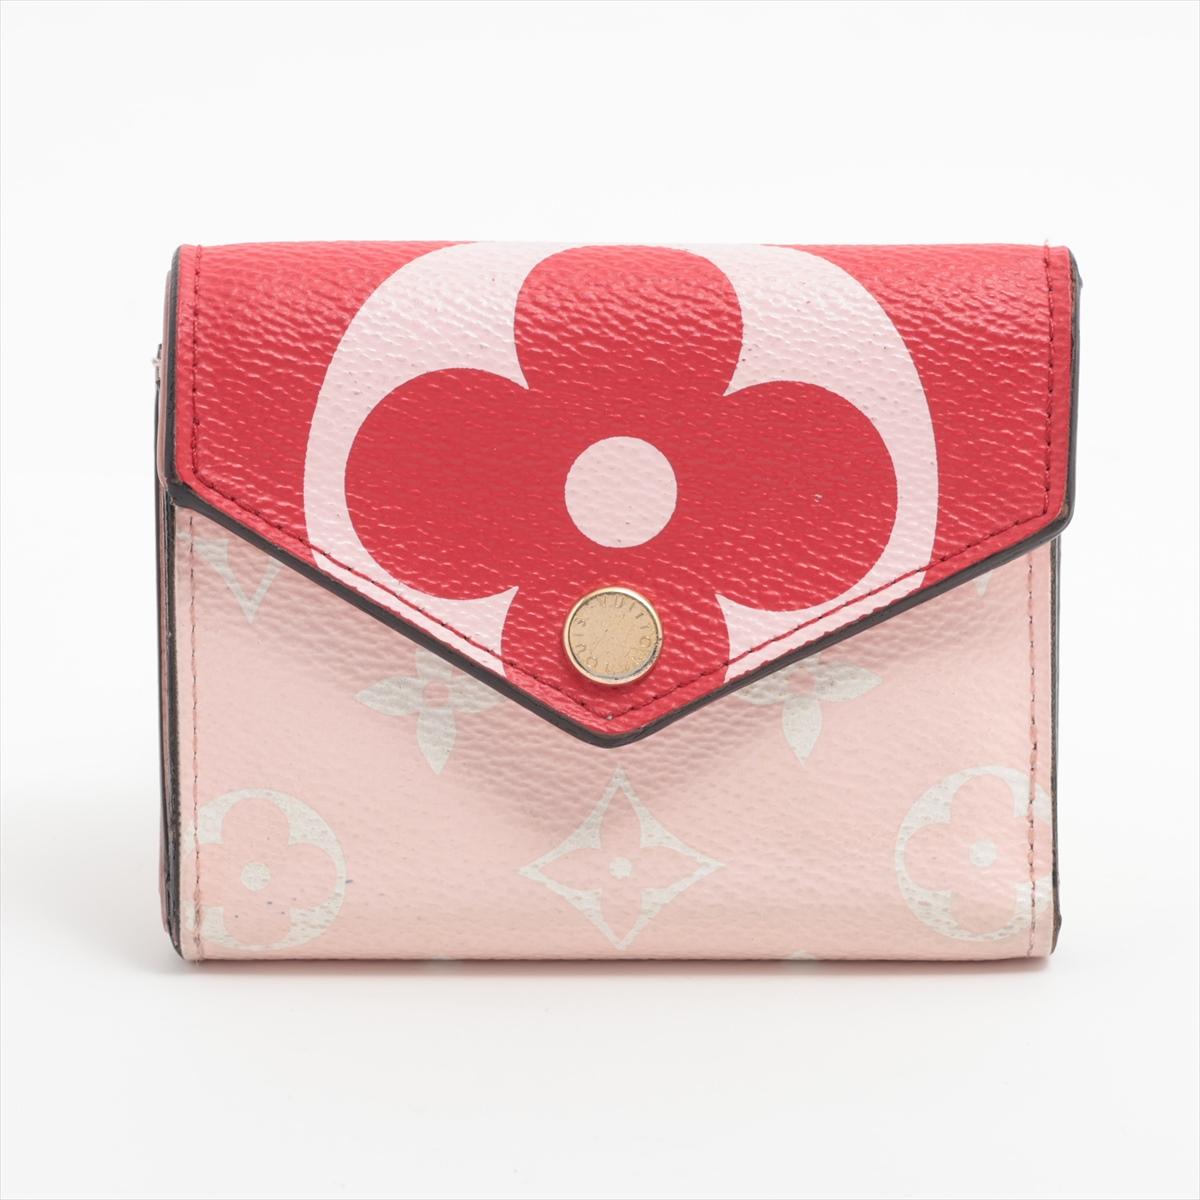 The Louis Vuitton Monogram Giant Portefeuille Zoé in Red and Pink is a vibrant and chic accessory that adds a pop of color to any ensemble. Crafted from the iconic giant Monogram canvas, the wallet showcases Louis Vuitton's timeless design with a